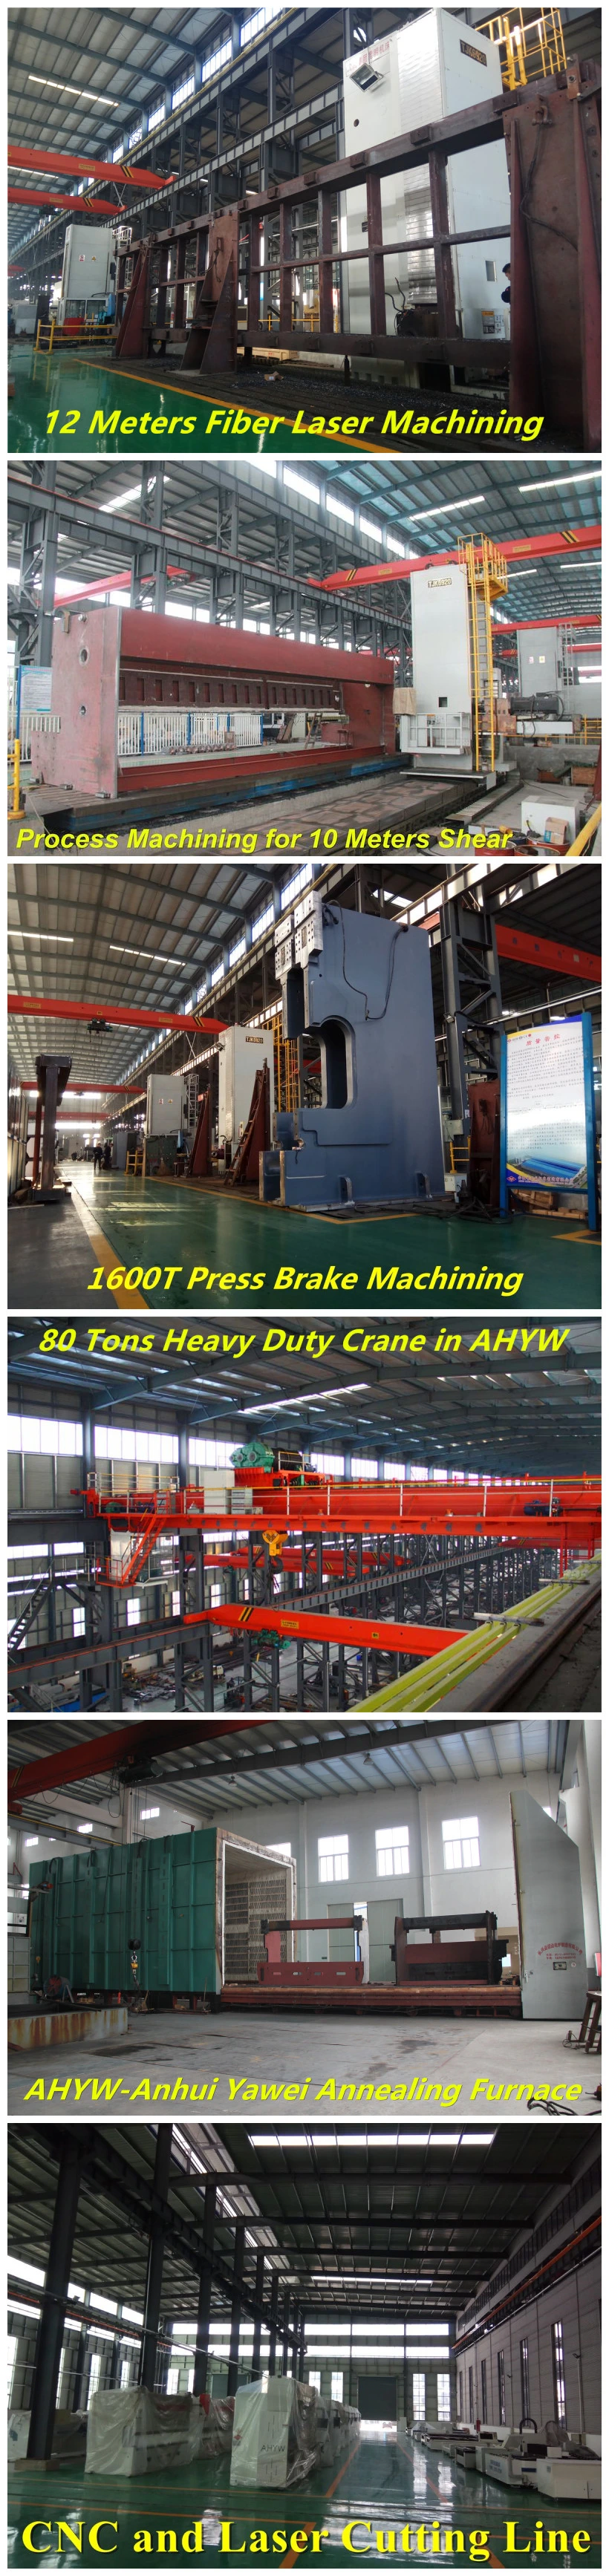 Atlantic Press Brake with Portable Nc Control and Probrammable